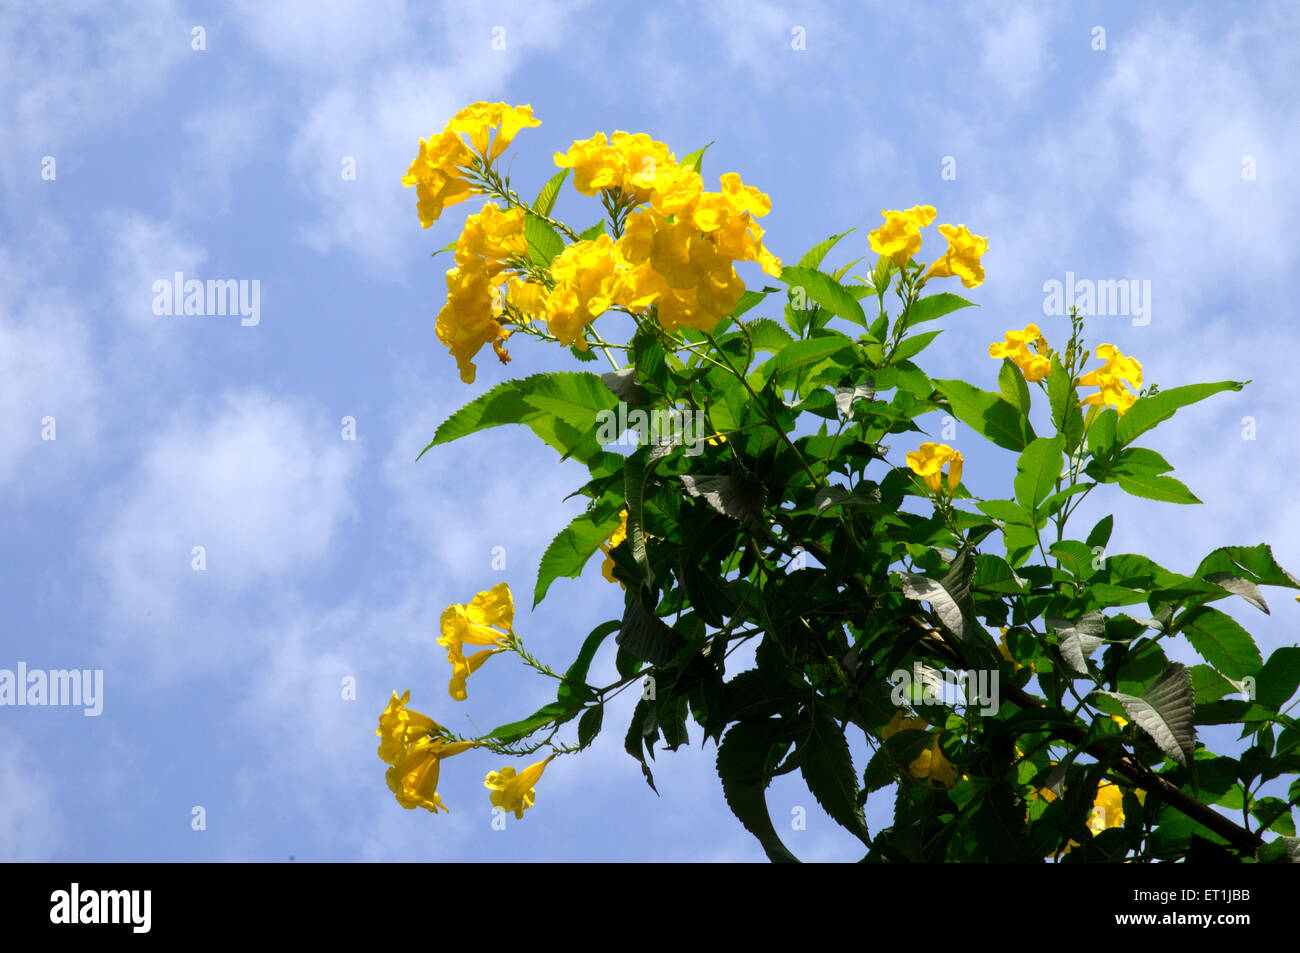 Tabebuia flower on silver trumpet tree against blue sky Stock Photo